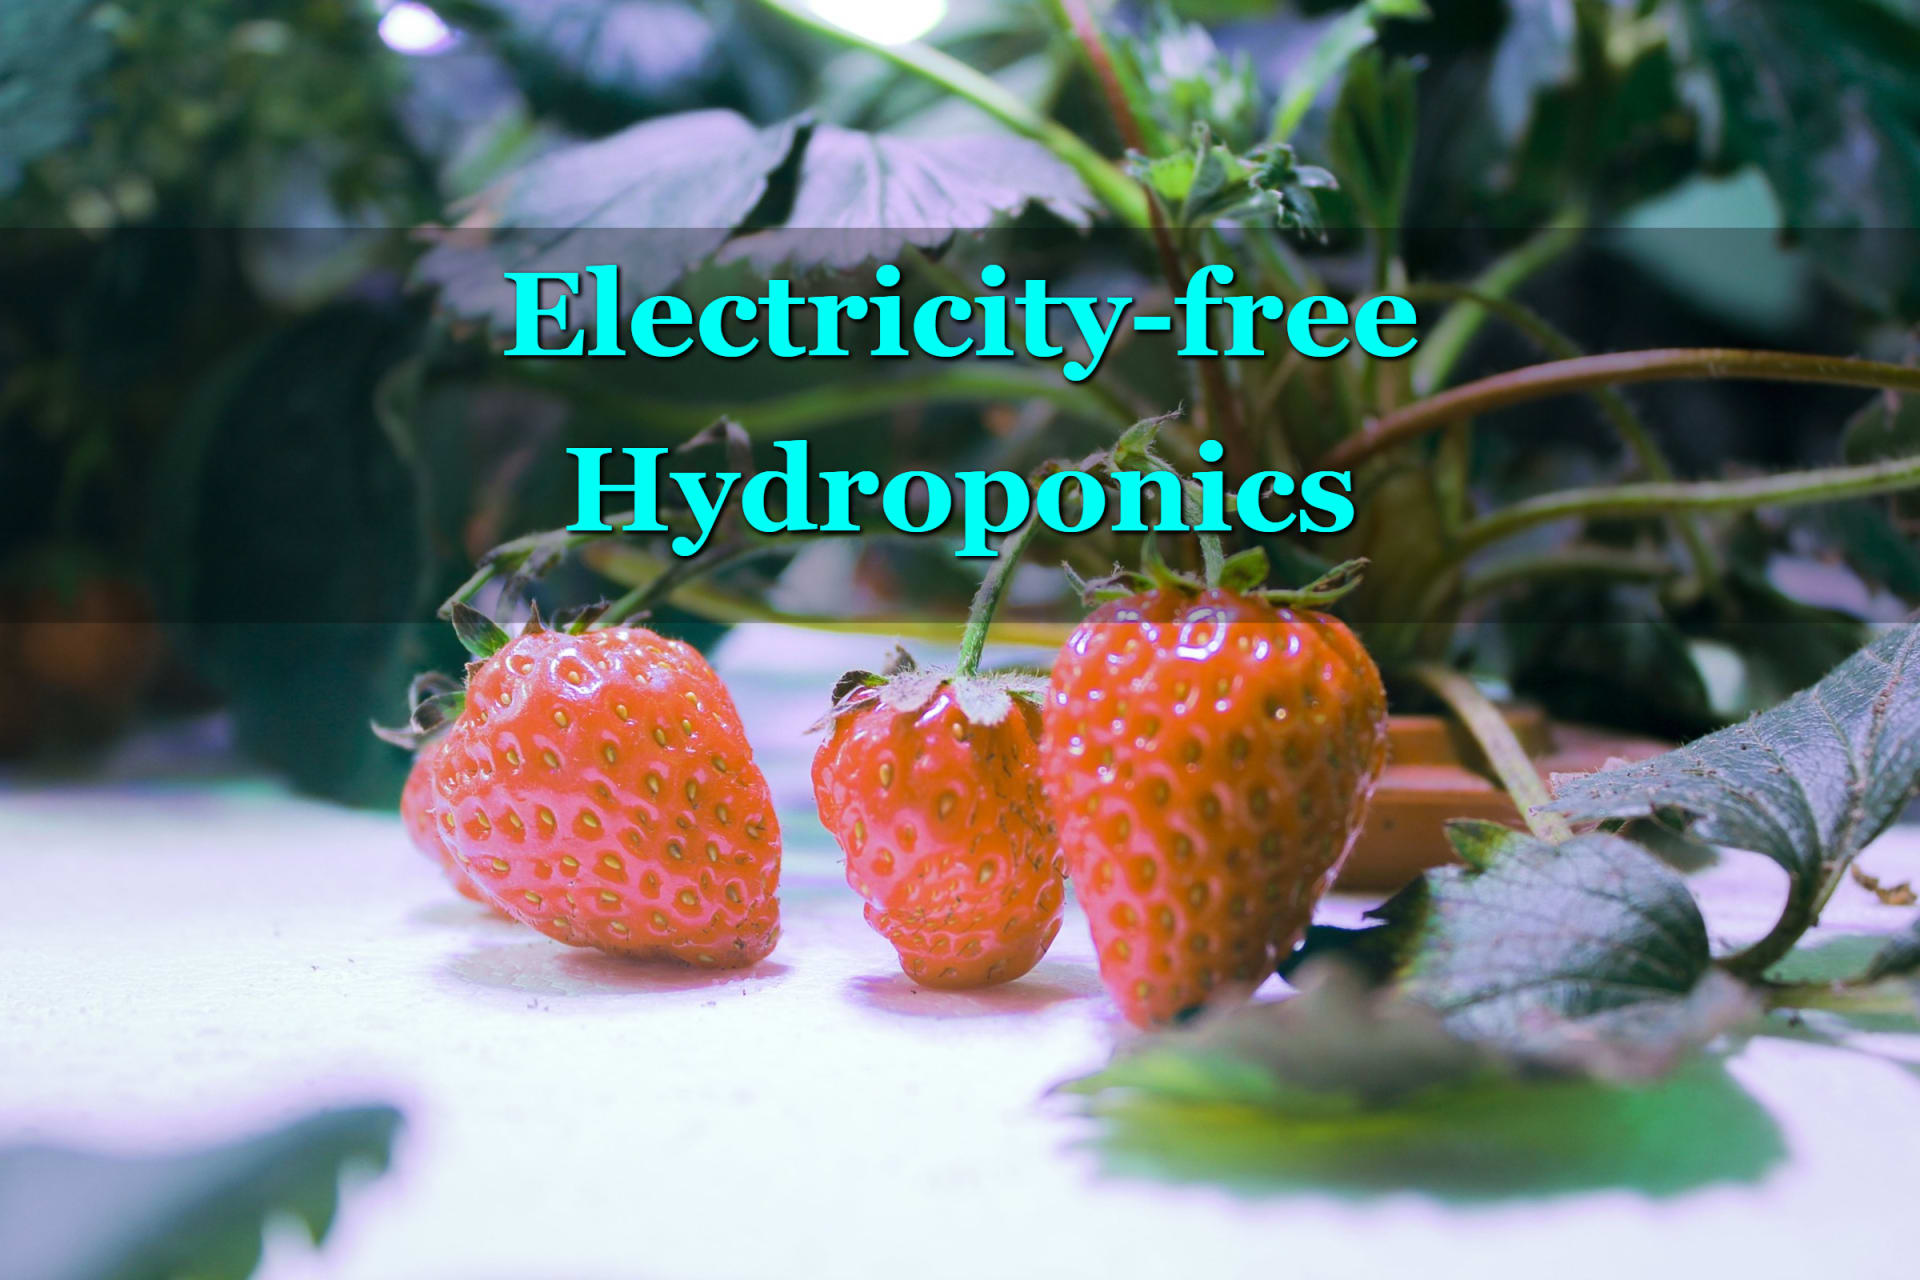 Strawberries grown in a hydroponics system without electricity